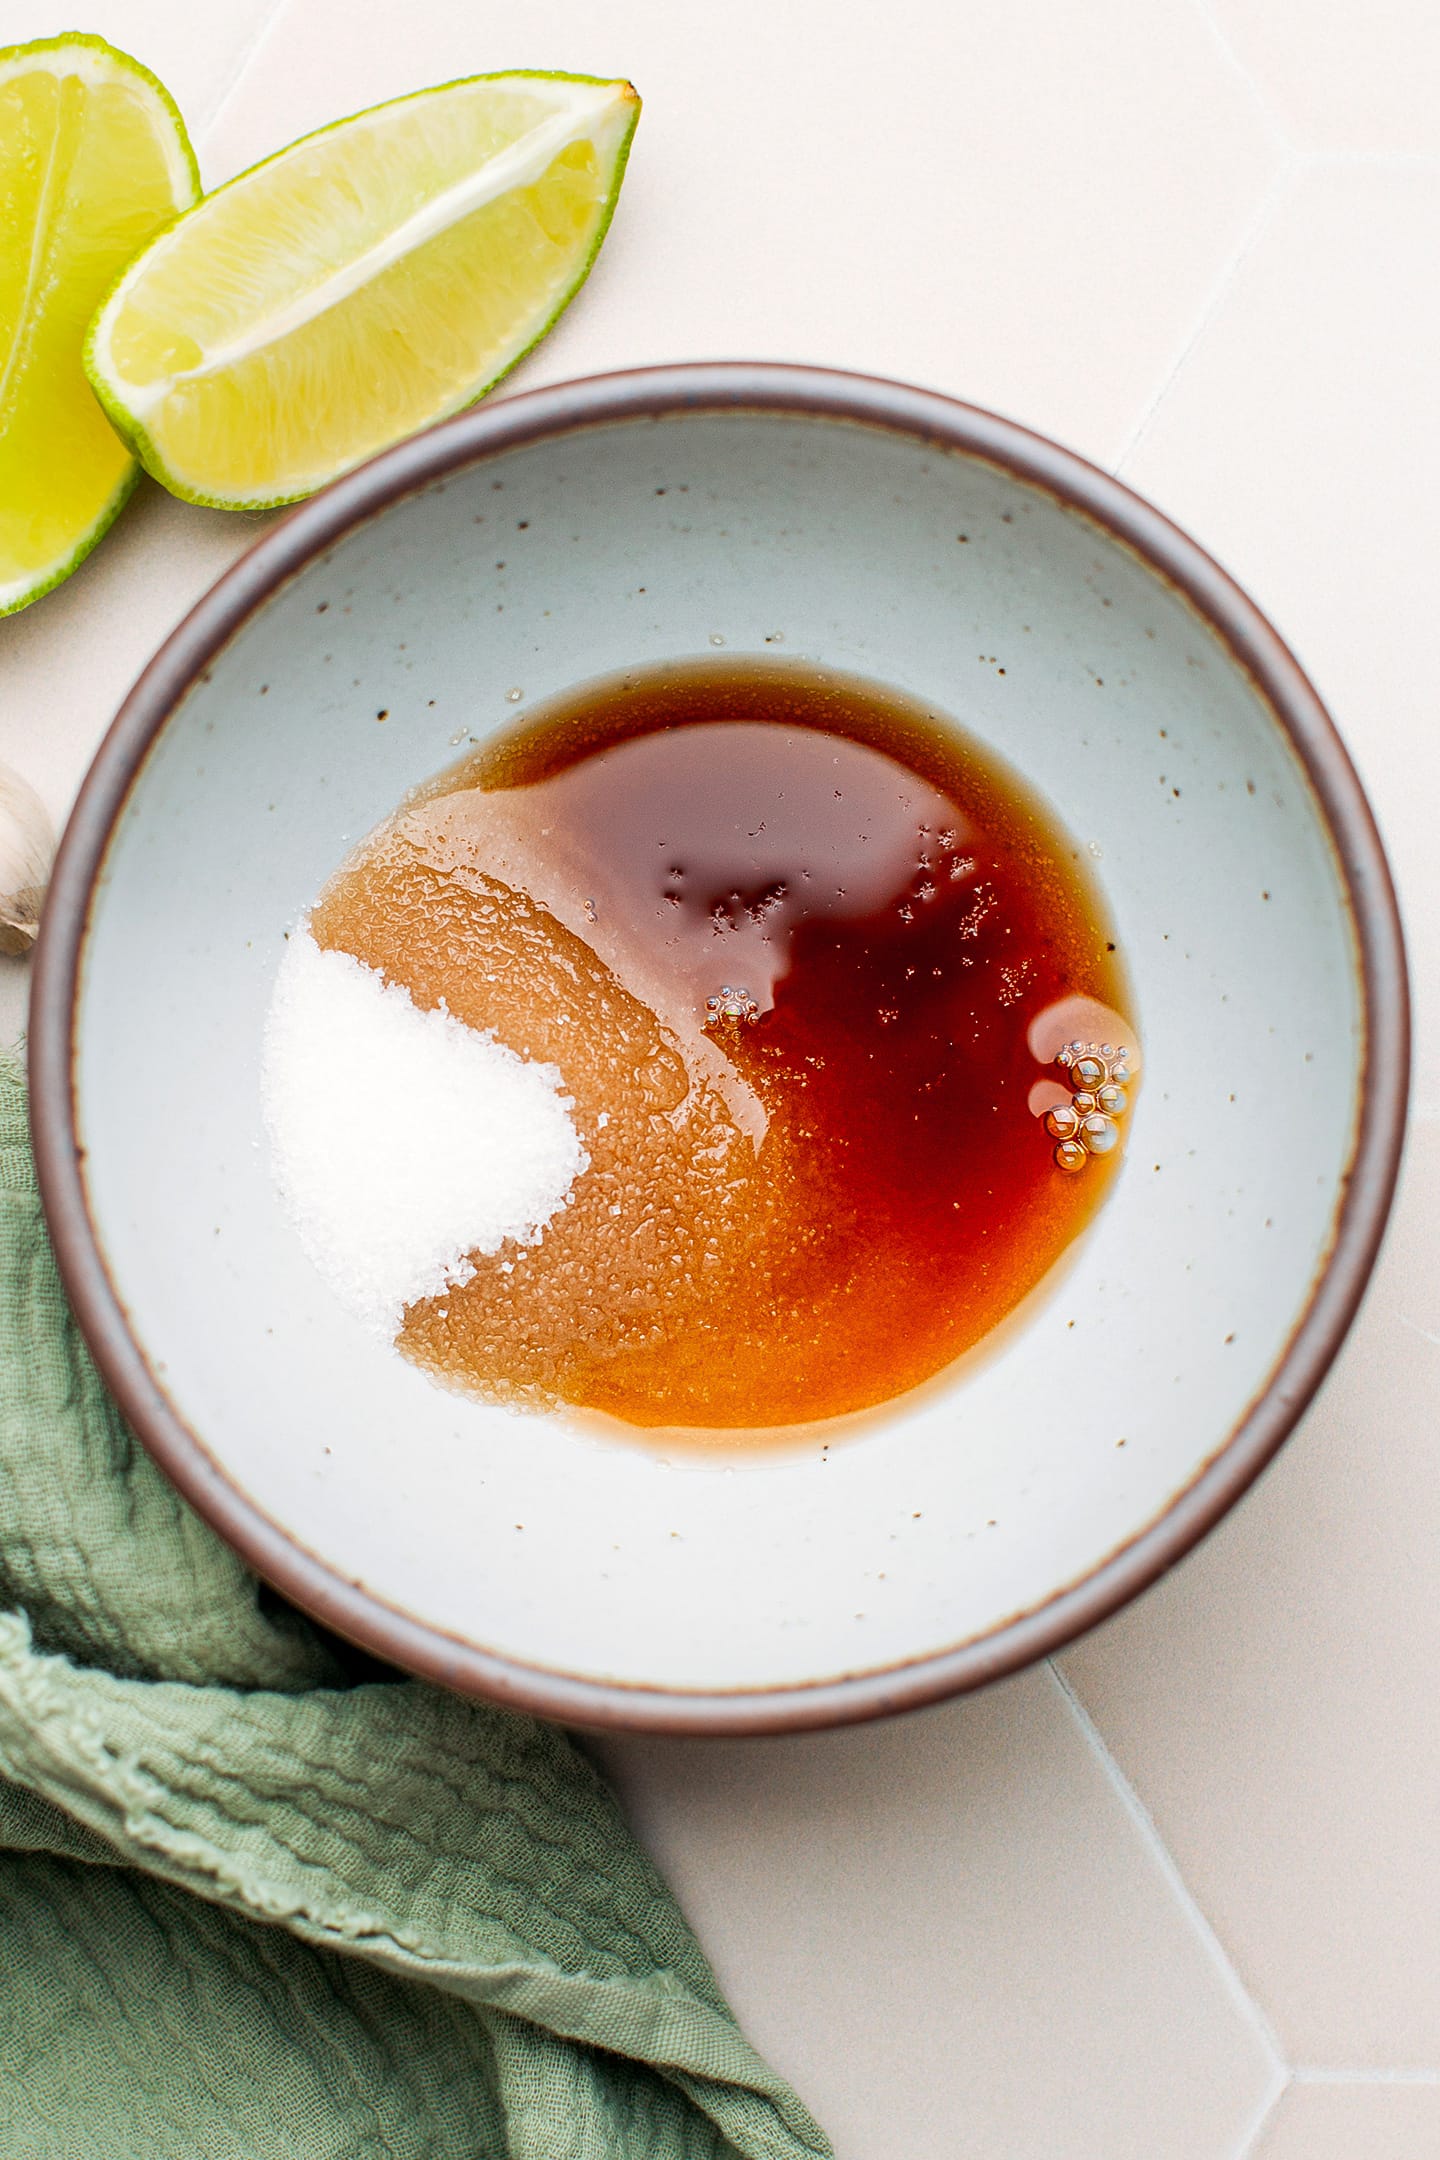 Sugar and fish sauce in a. bowl.